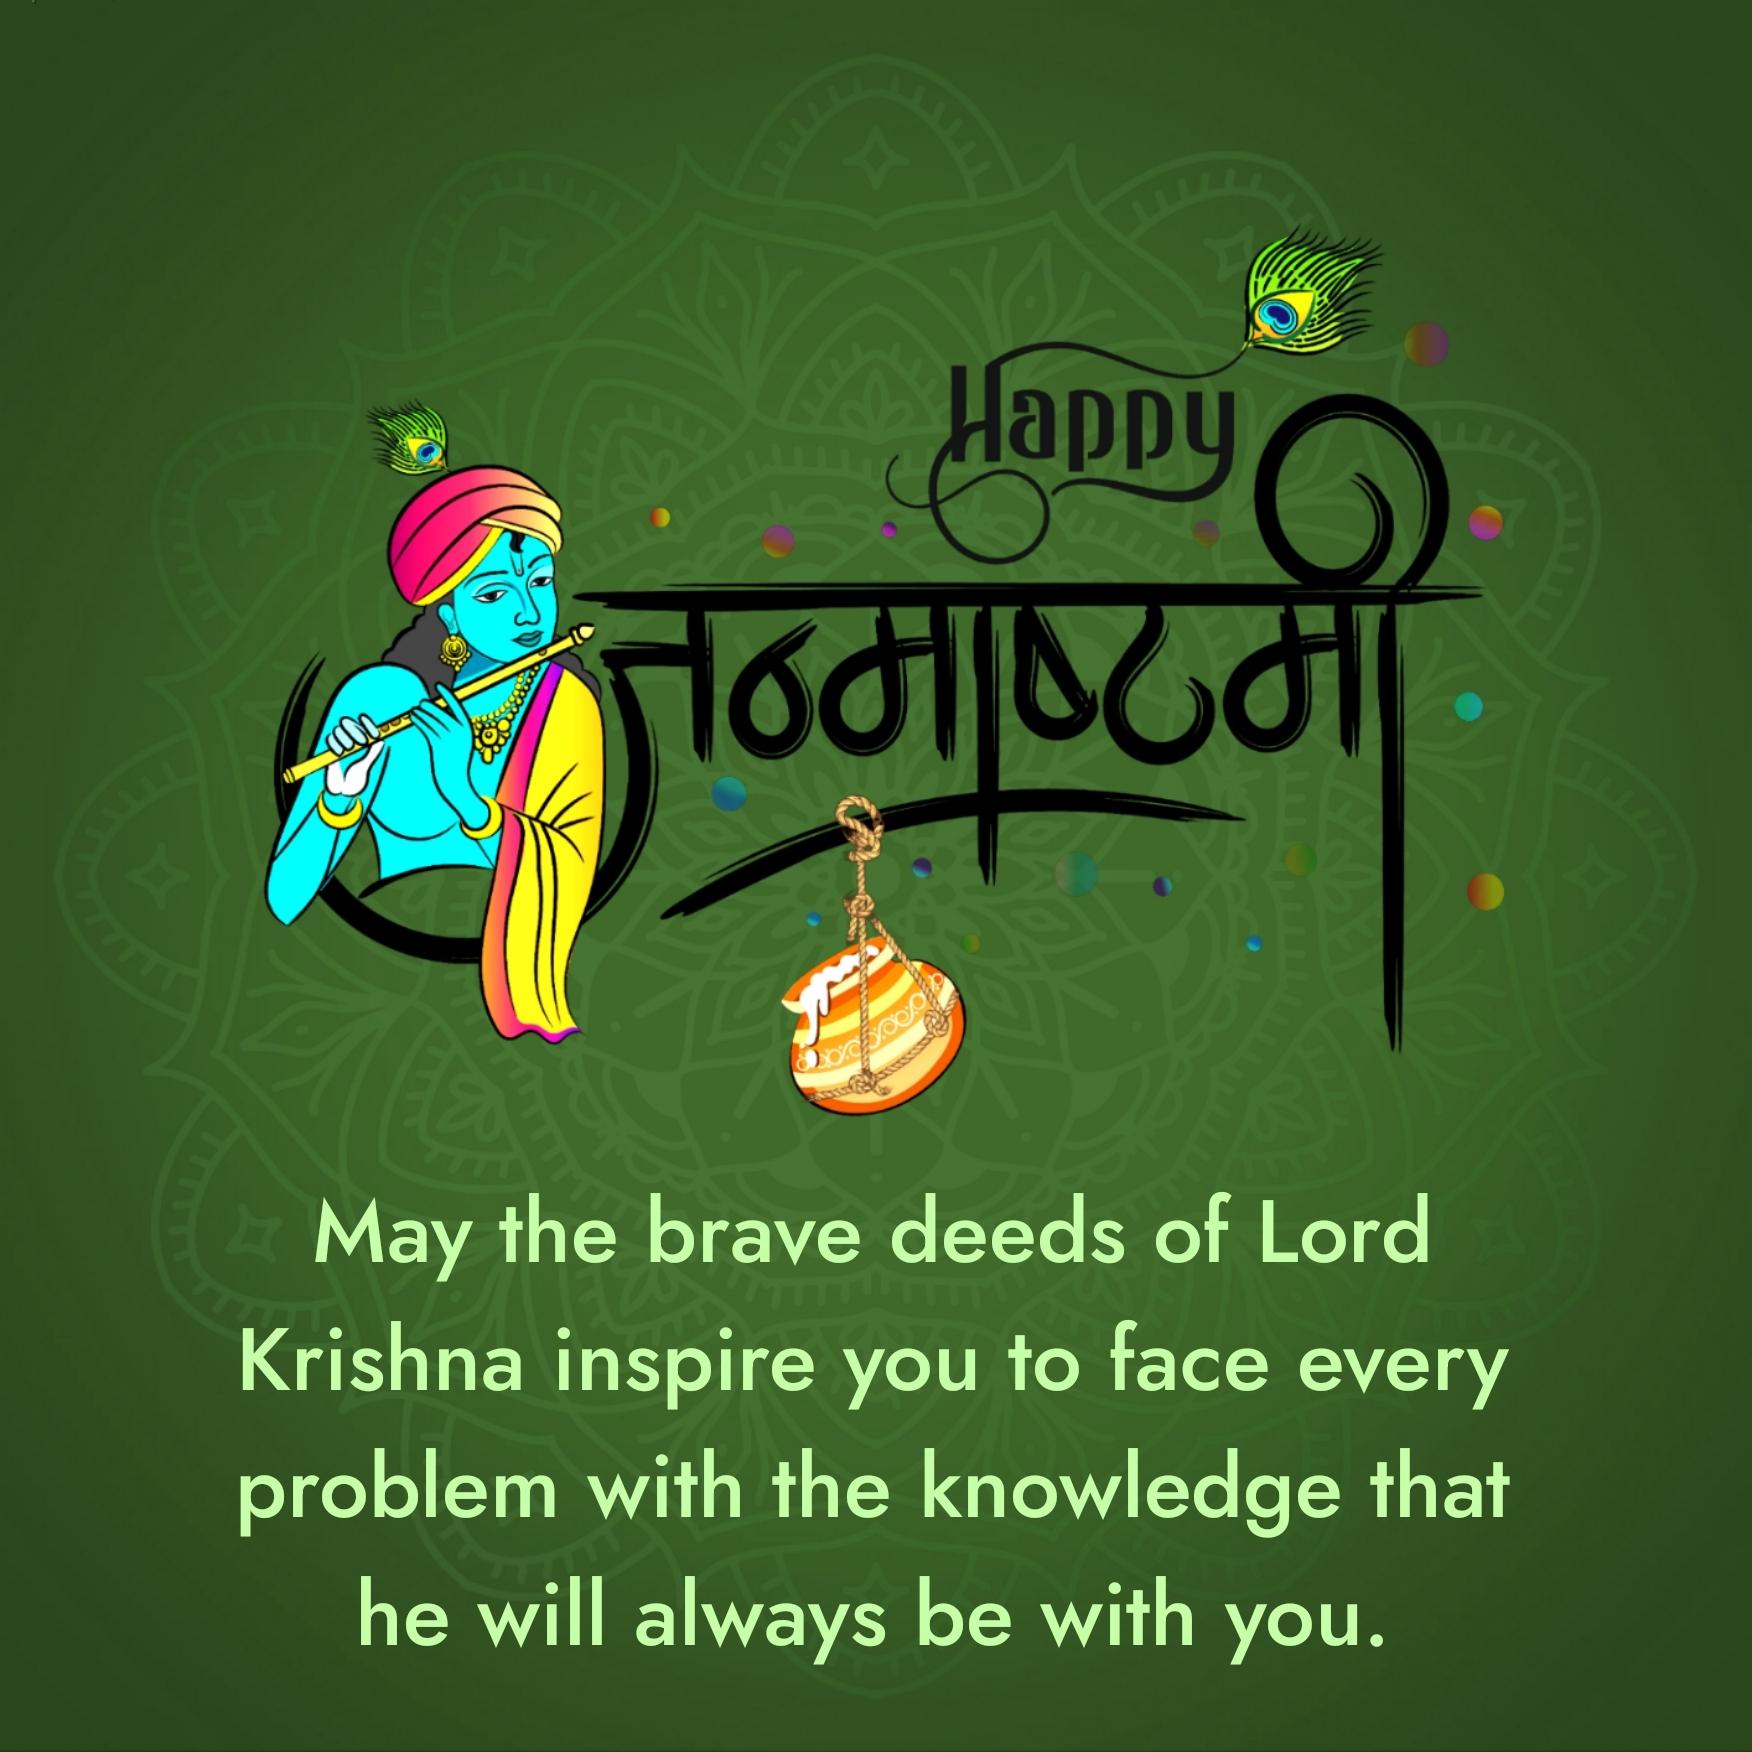 May the brave deeds of Lord Krishna inspire you to face every problem